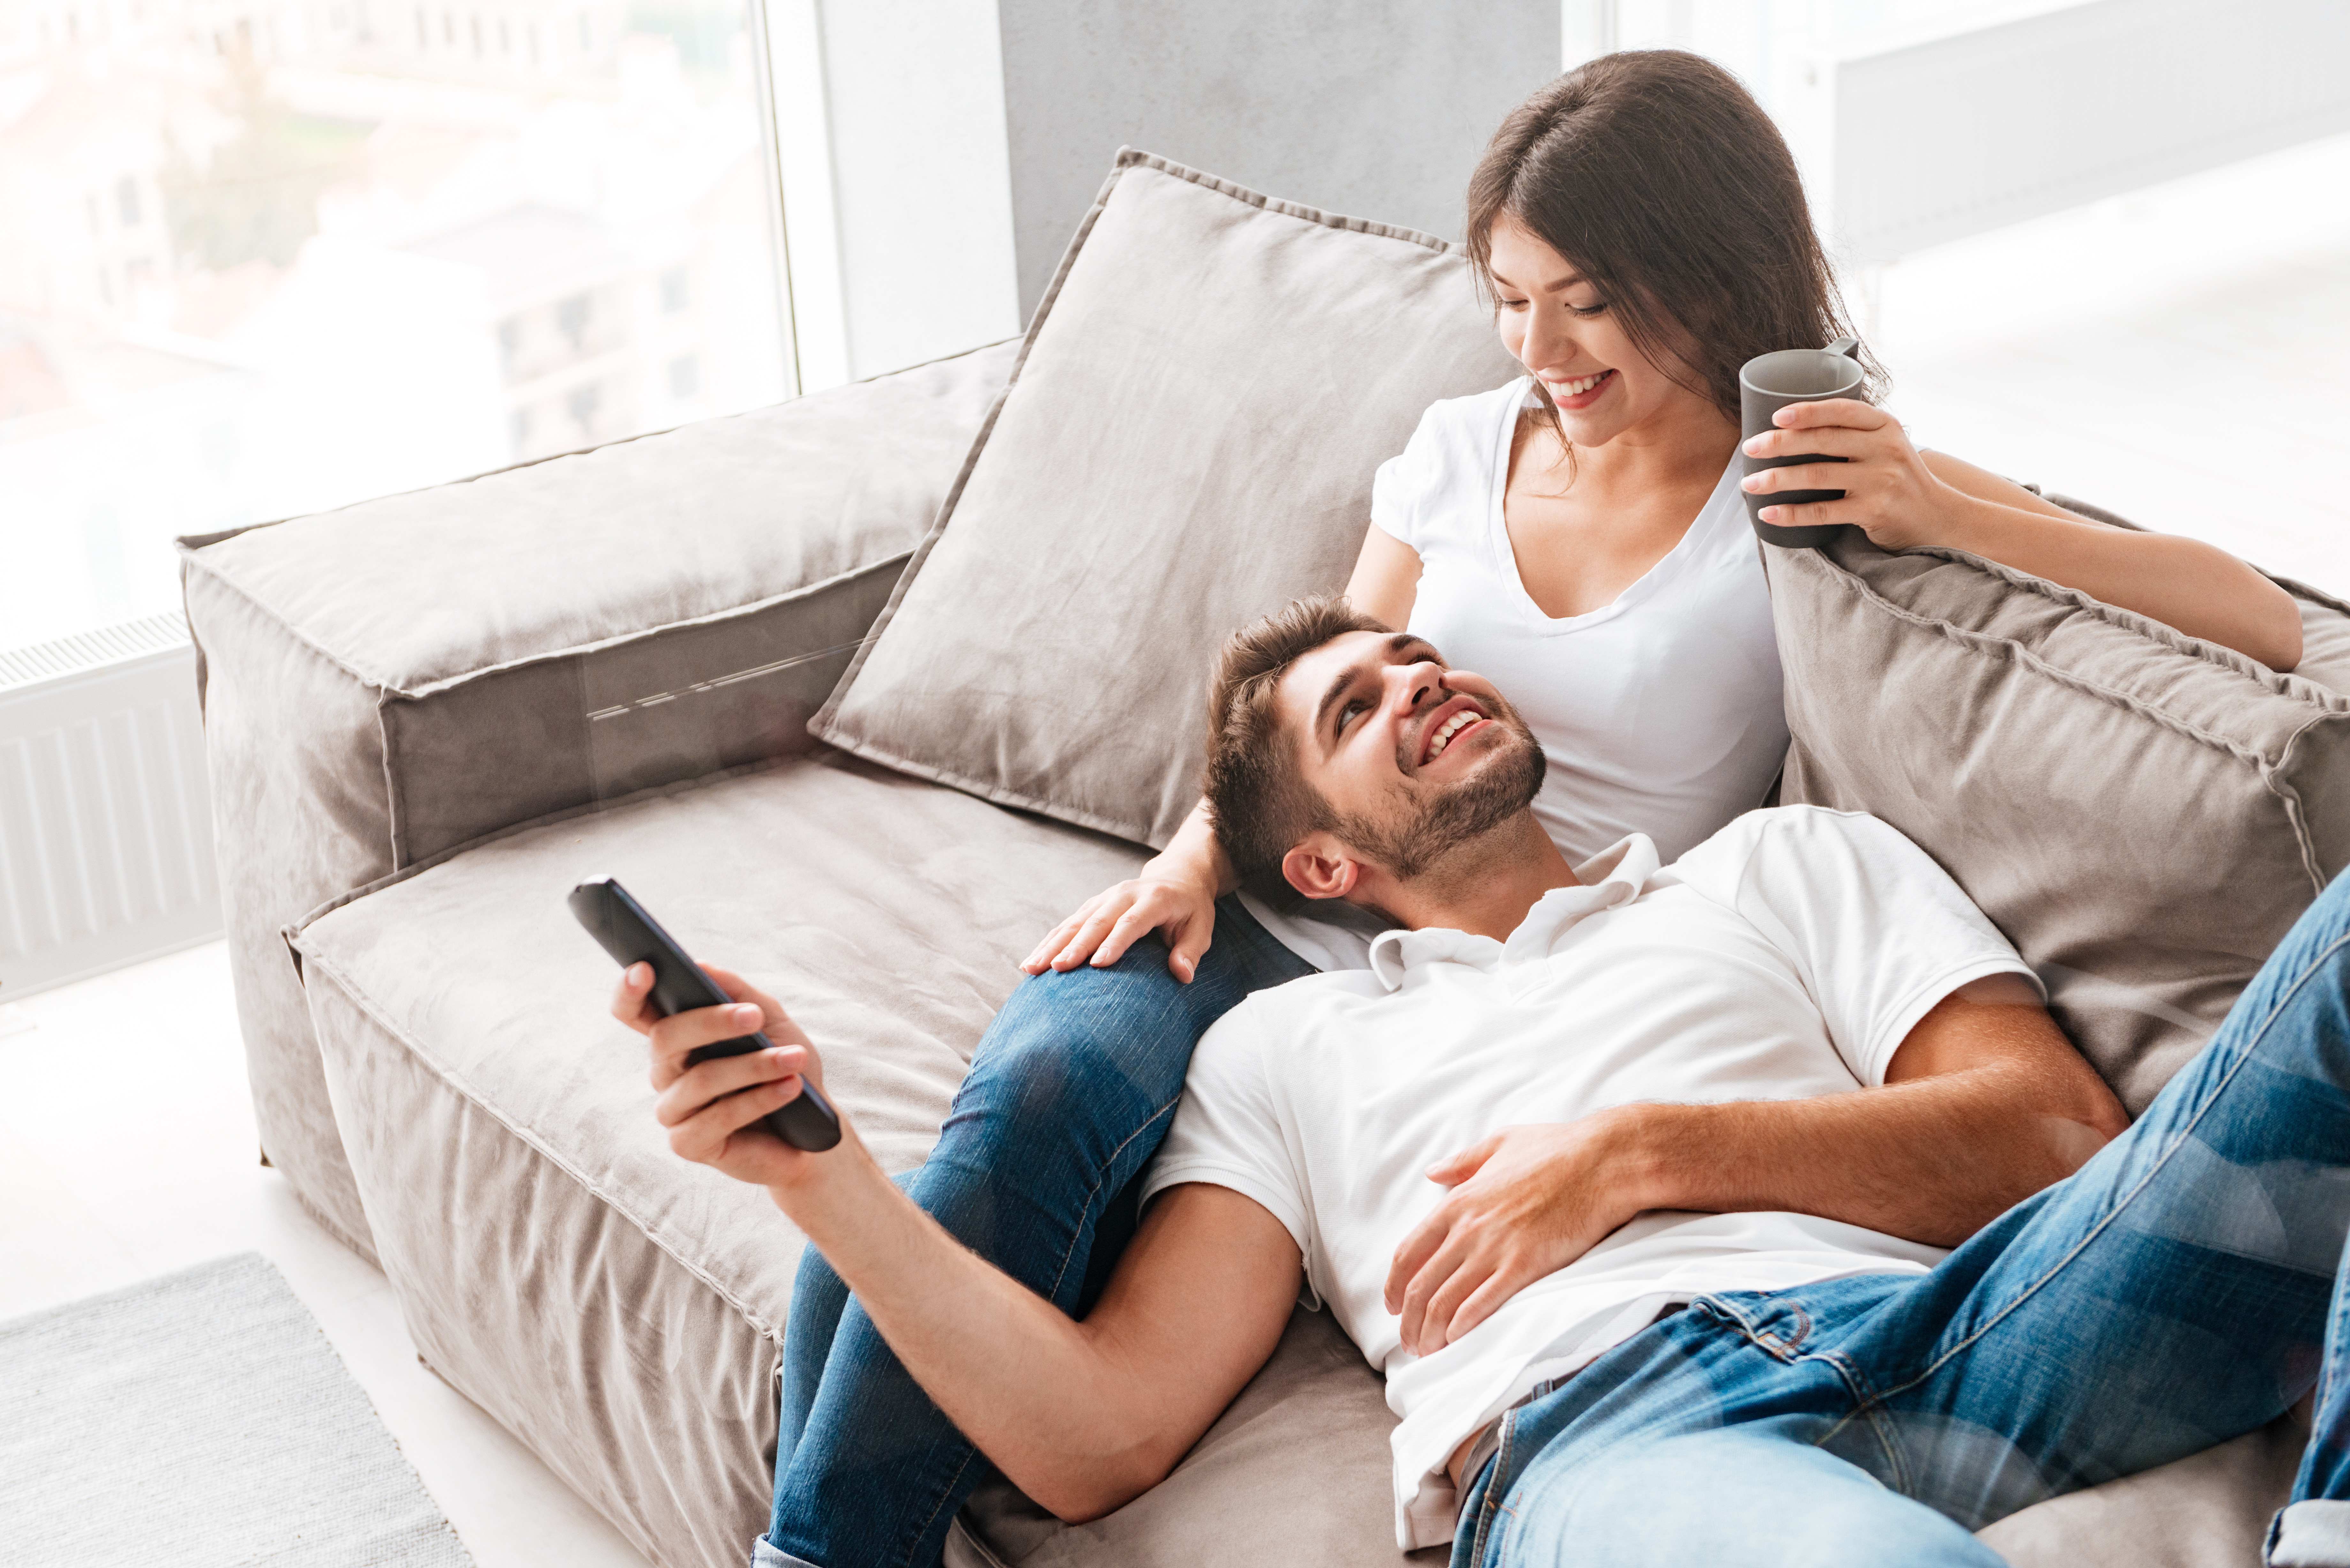 A happy couple lying on a couch | Source: Shutterstock